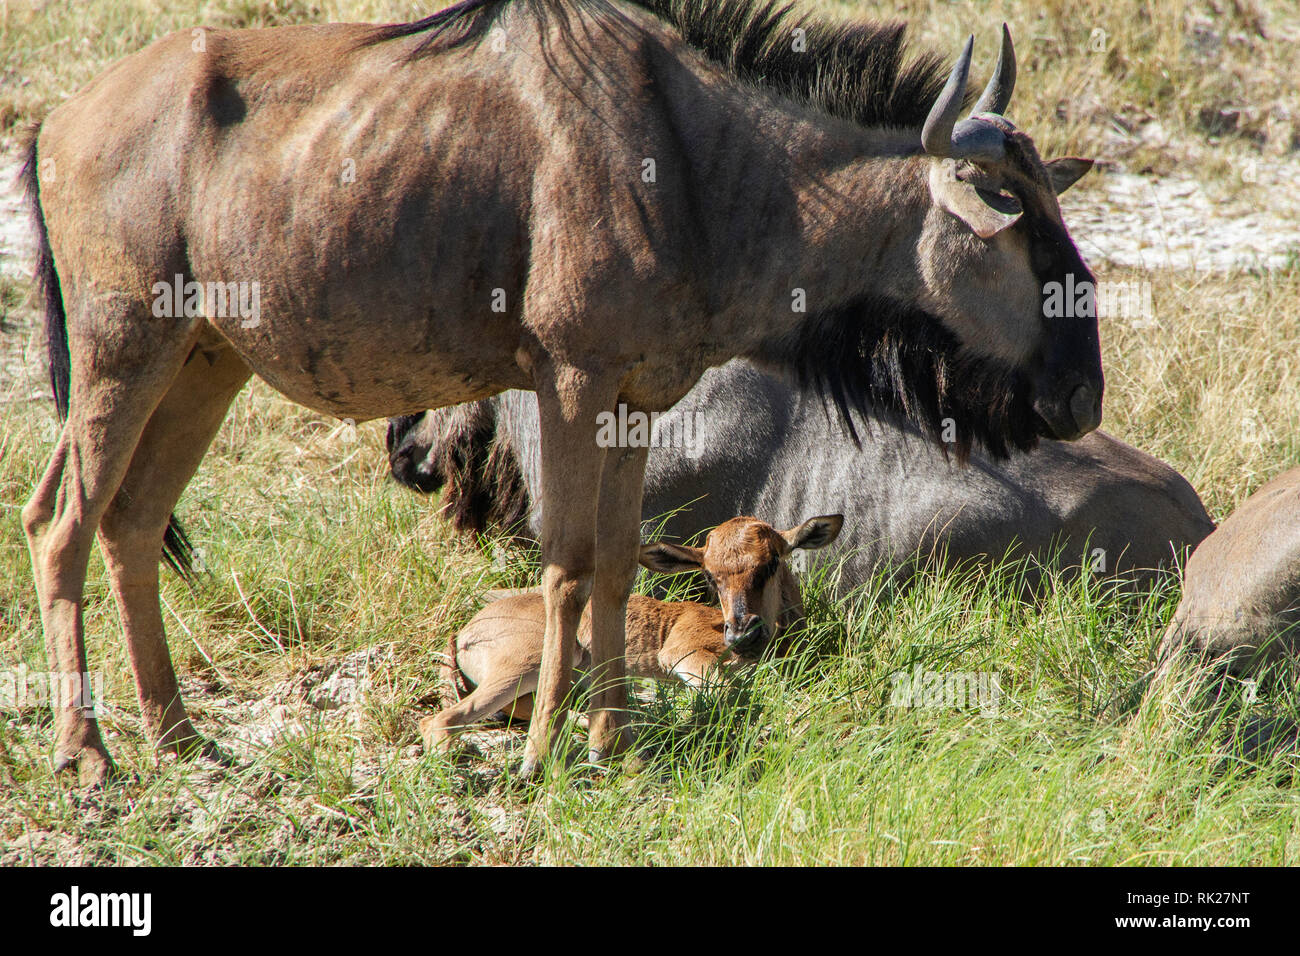 A baby blue wildebeest; onnochaetes taurinus; resting in a small group with one standing over it. Stock Photo